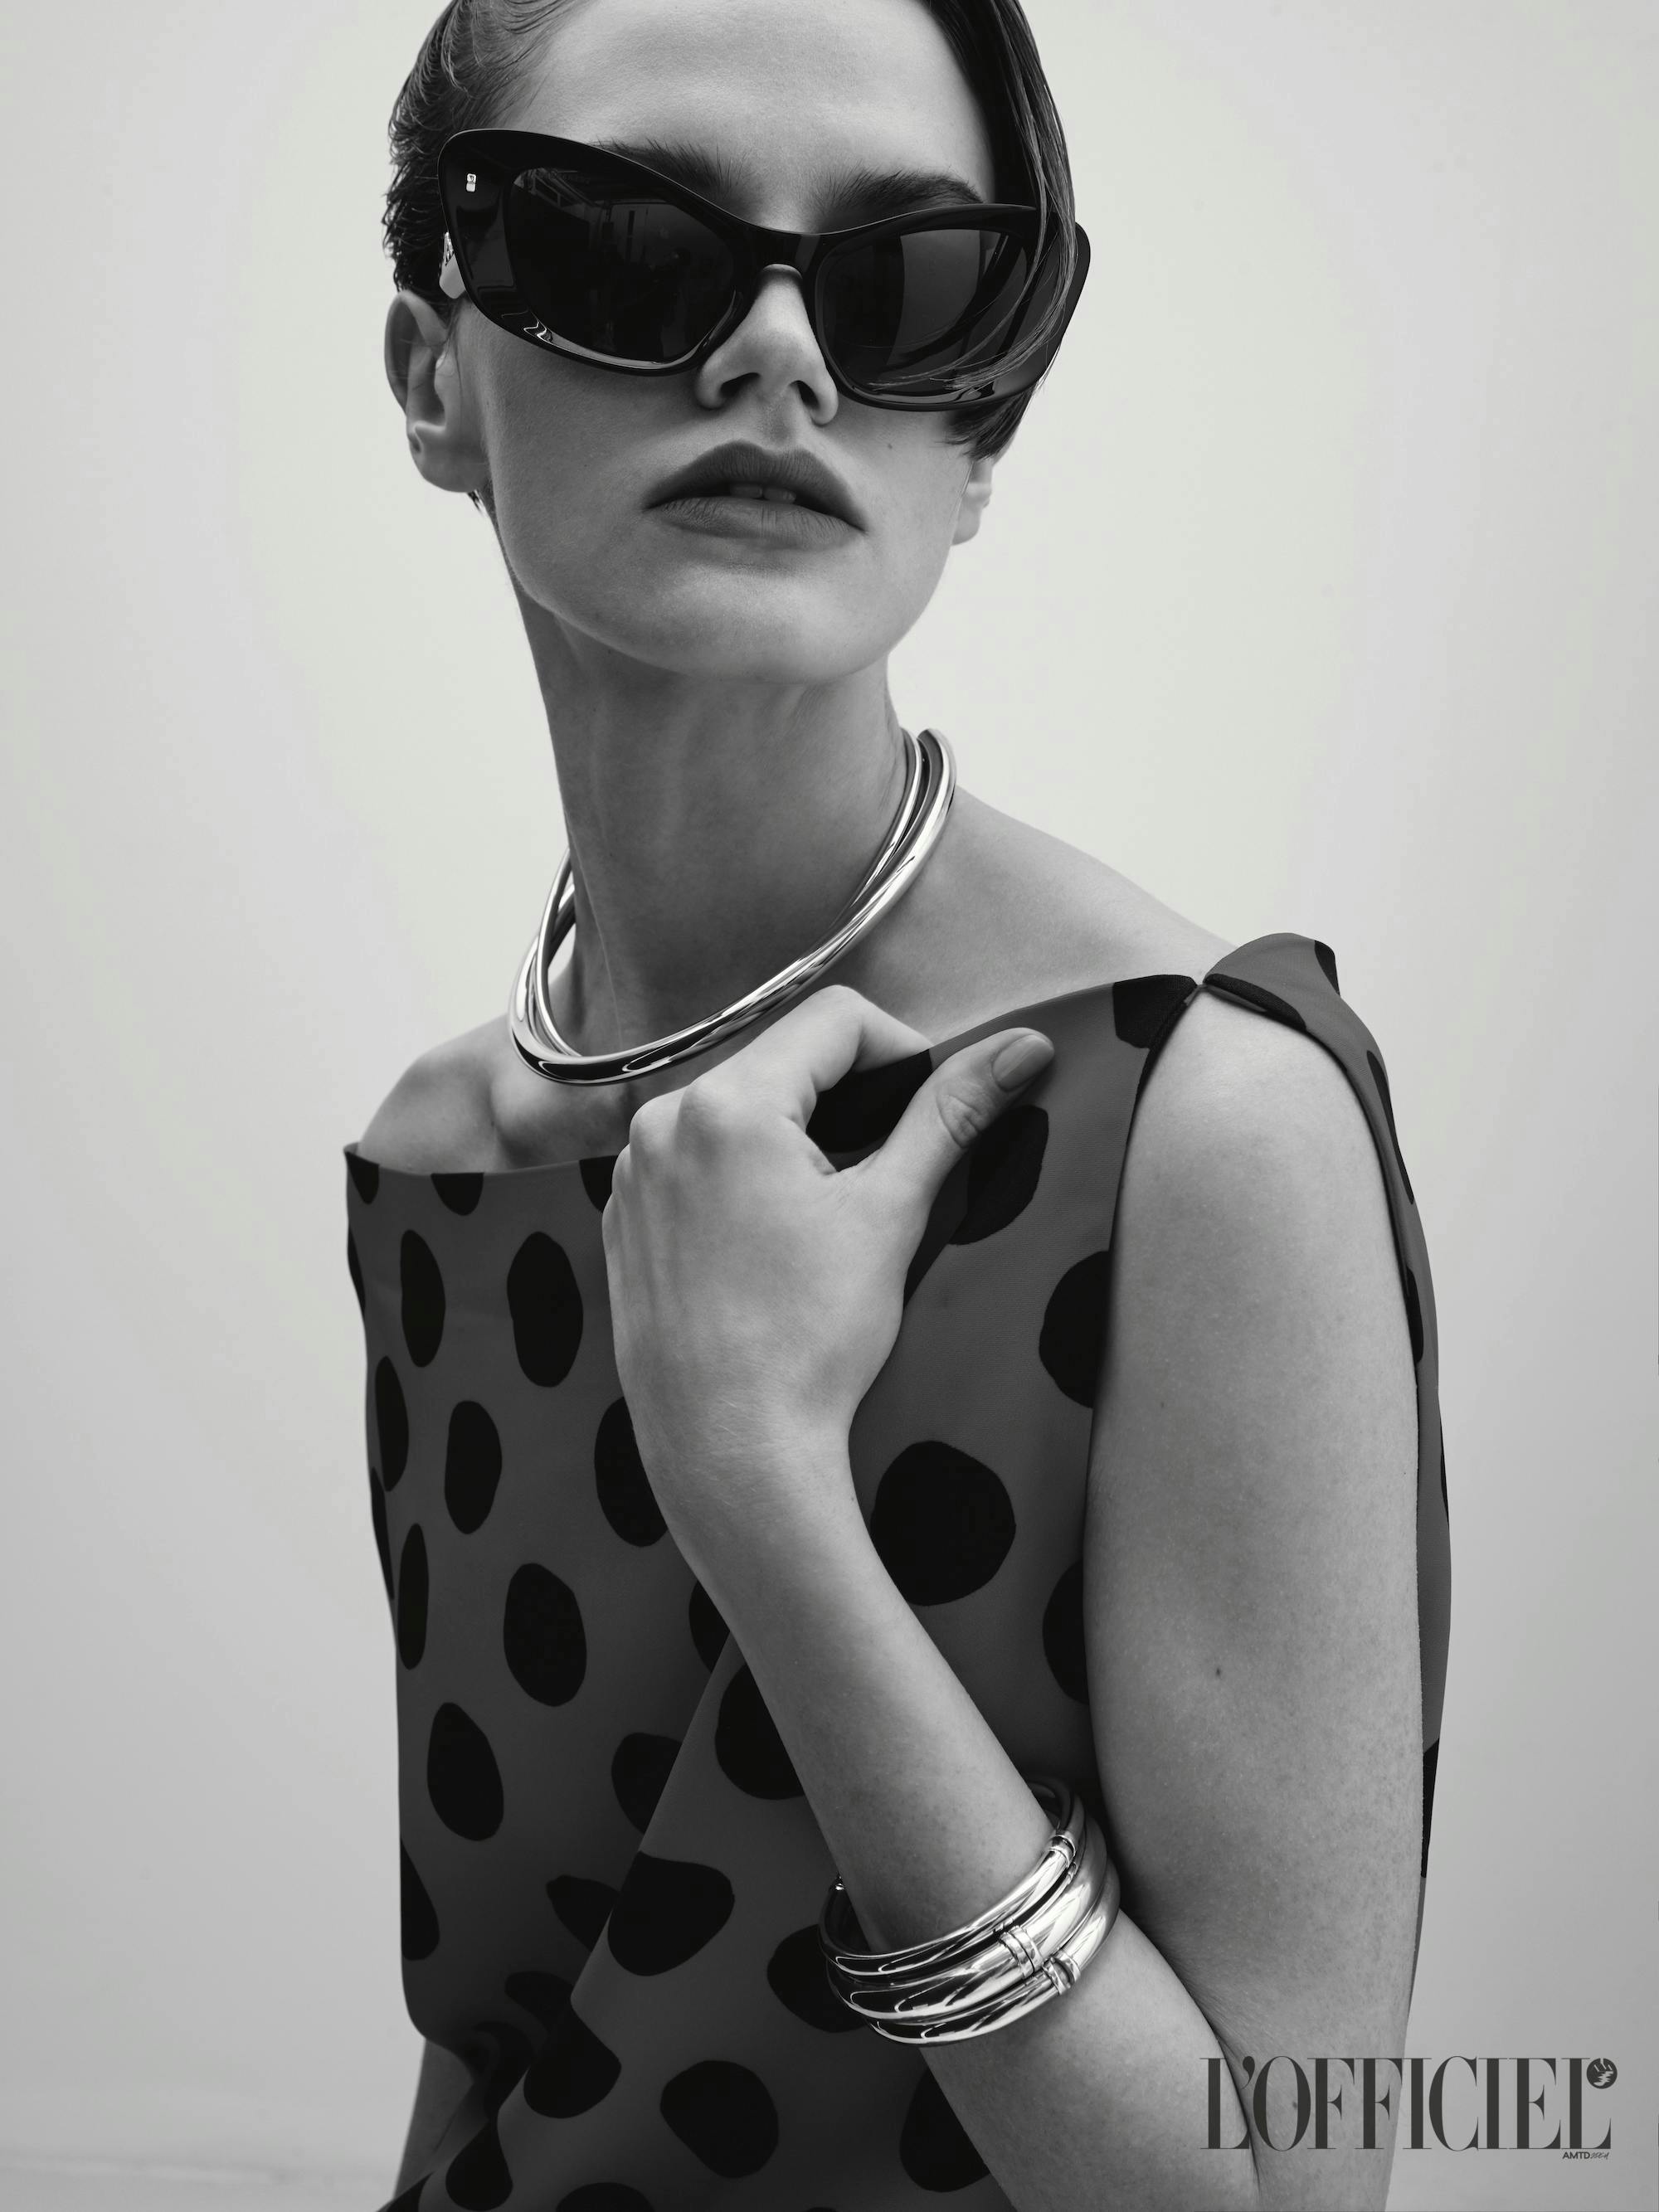 model posing wearing sunglasses, necklace and bangles